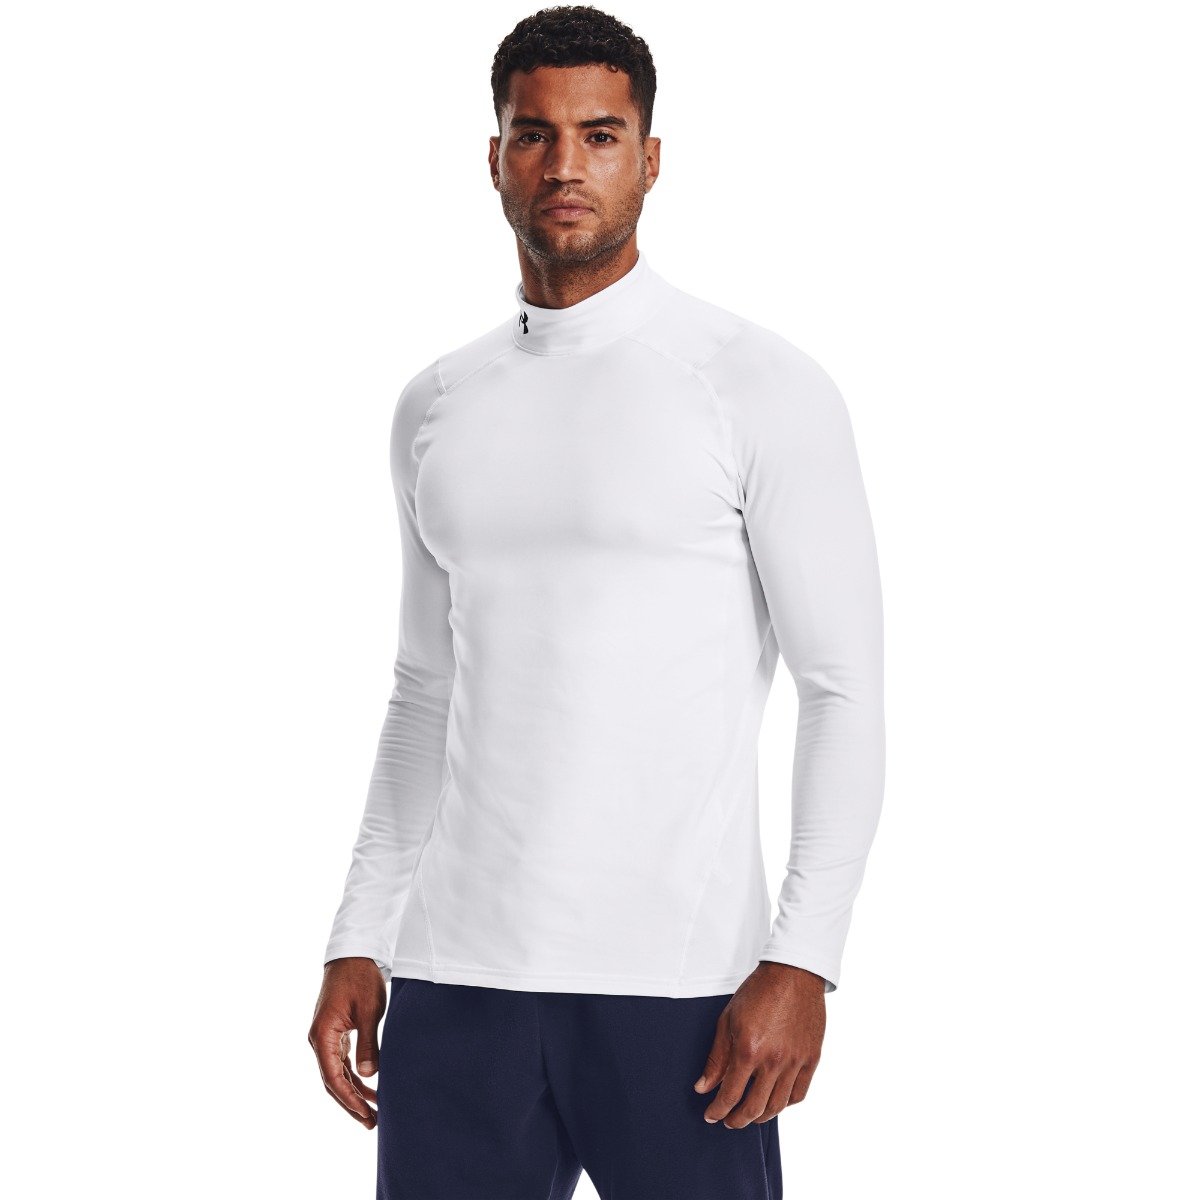 Under Armour Mens Cg Mock Fitted Long-Sleeve Shirt 